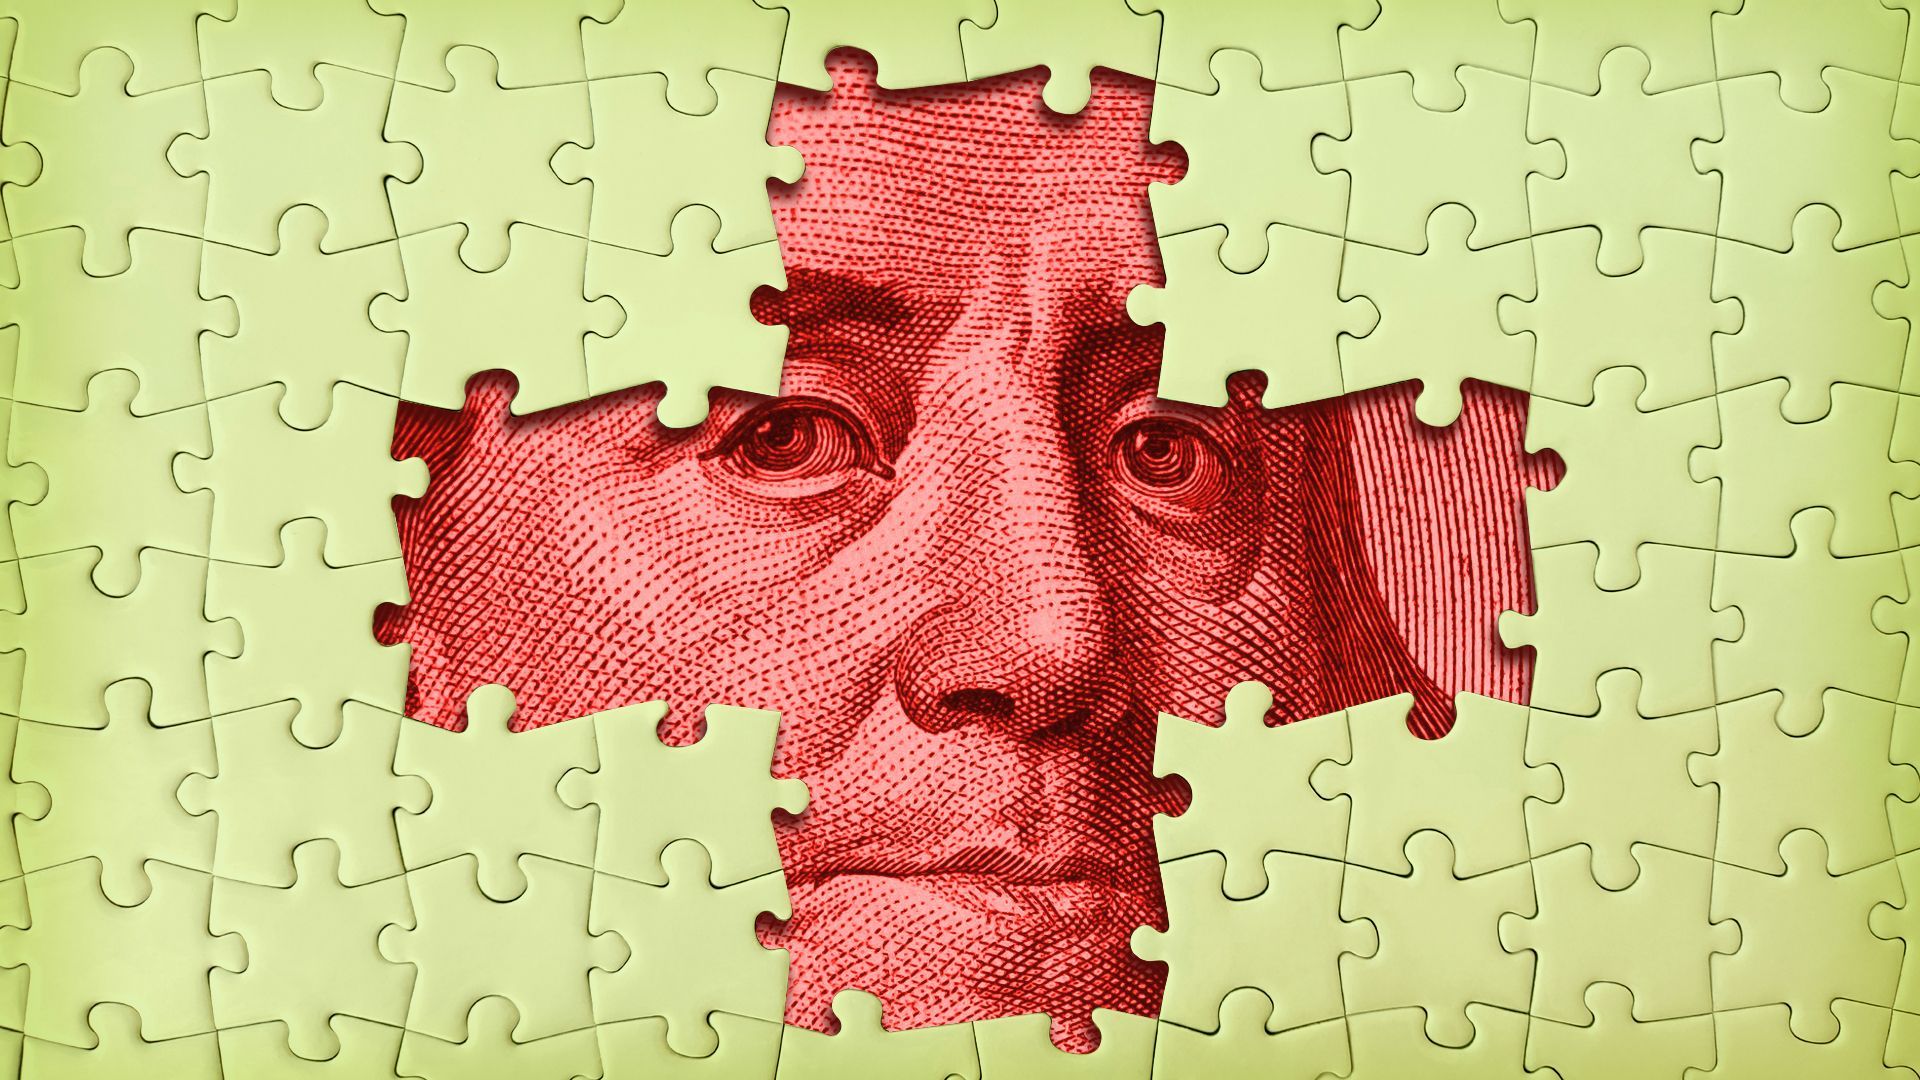 Illustration of a puzzle with pieces missing out of the center in the shape of a red cross revealing the face of Benjamin Franklin from a hundred dollar bill